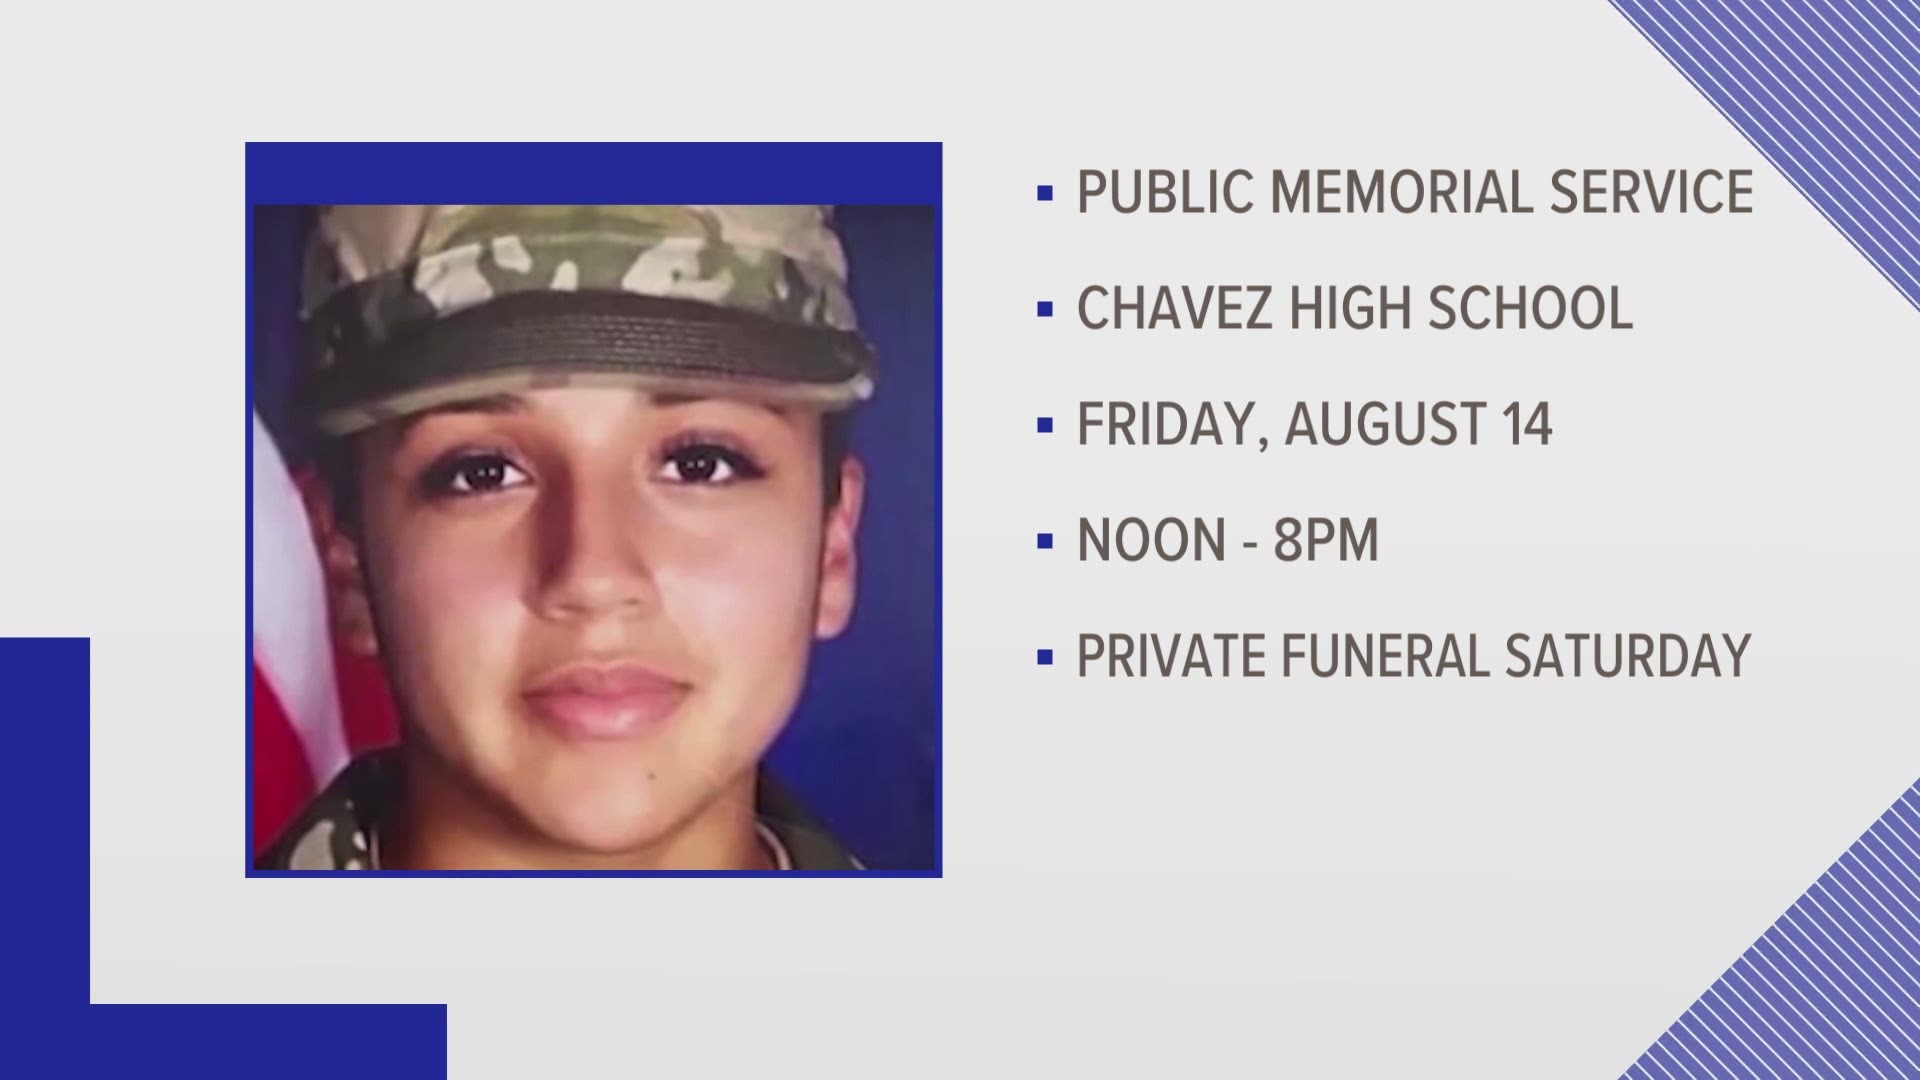 The memorial will be at Chavez High School, where Vanessa Guillen went to school. A private funeral will be held on Saturday.